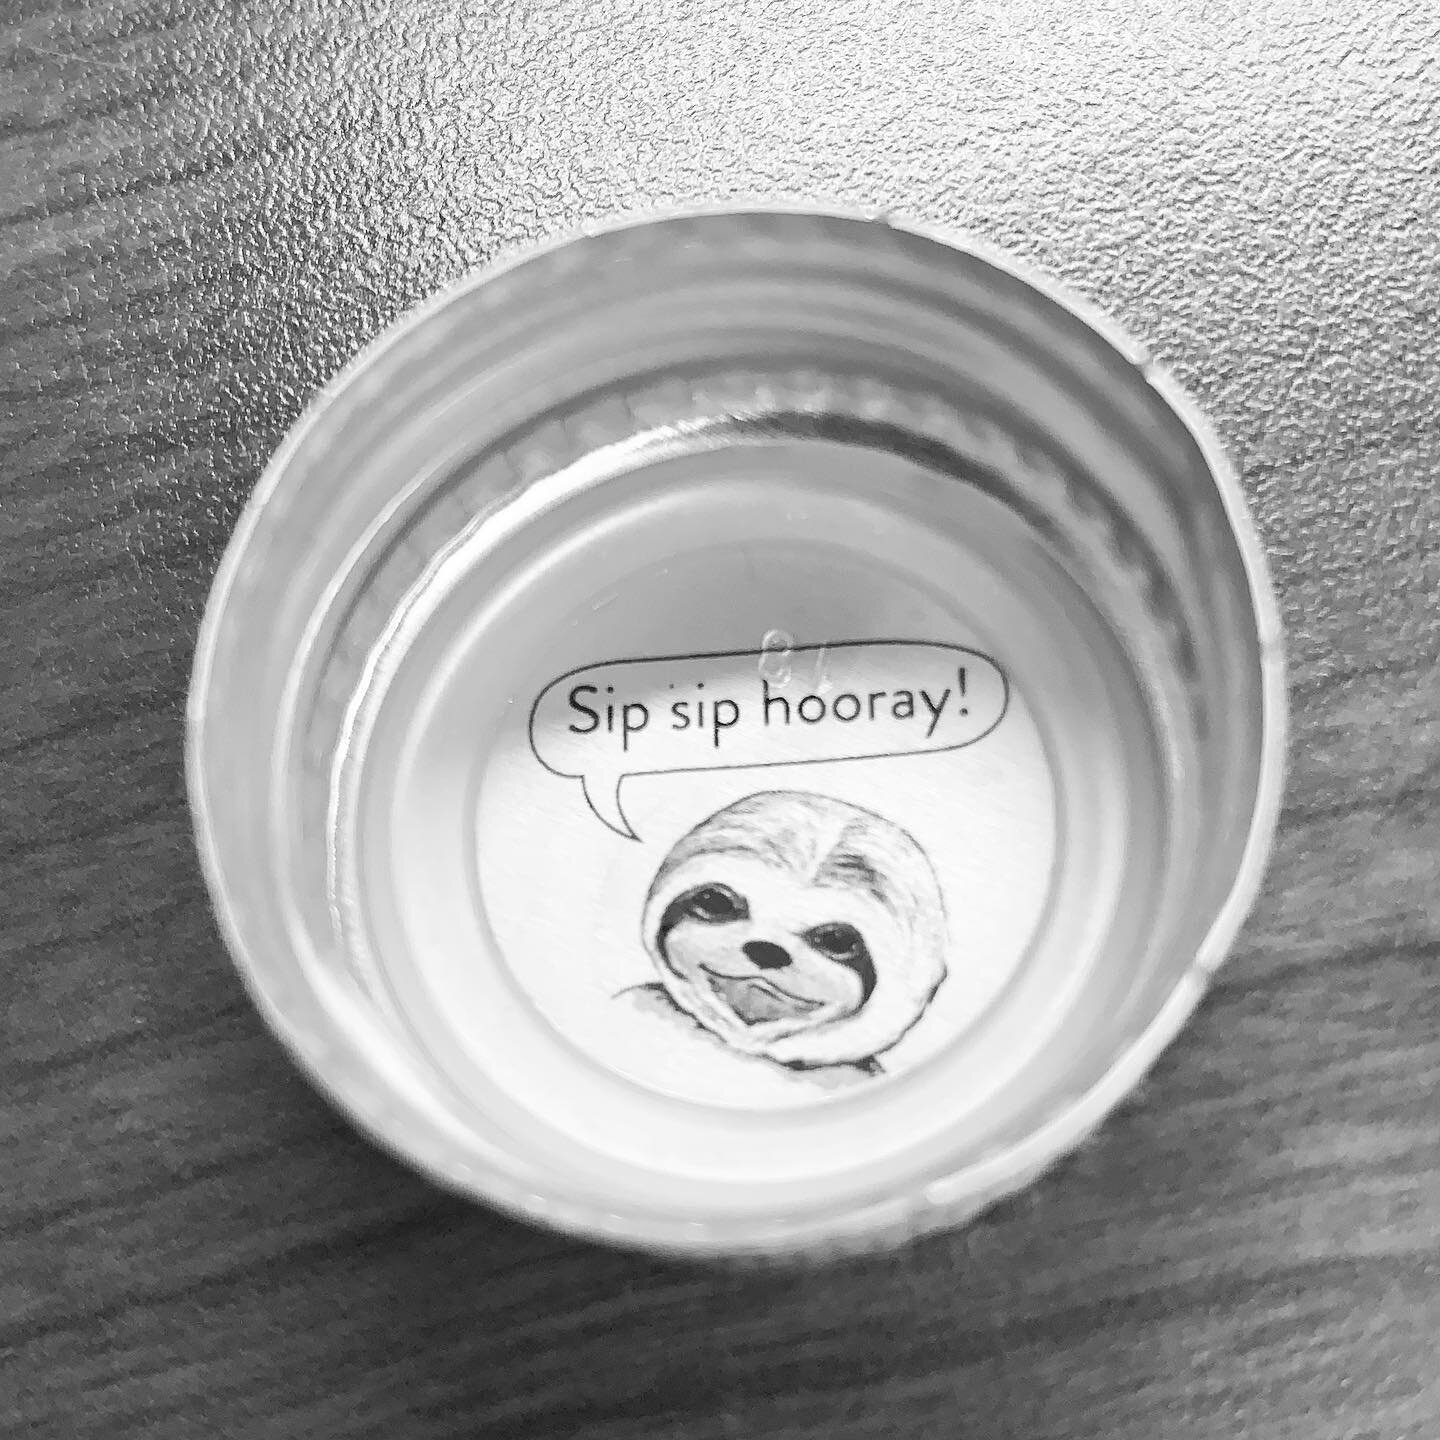 Somehow this just made my lunchtime. 🥰 #kombucha #slothlove #lunchtimesmiles